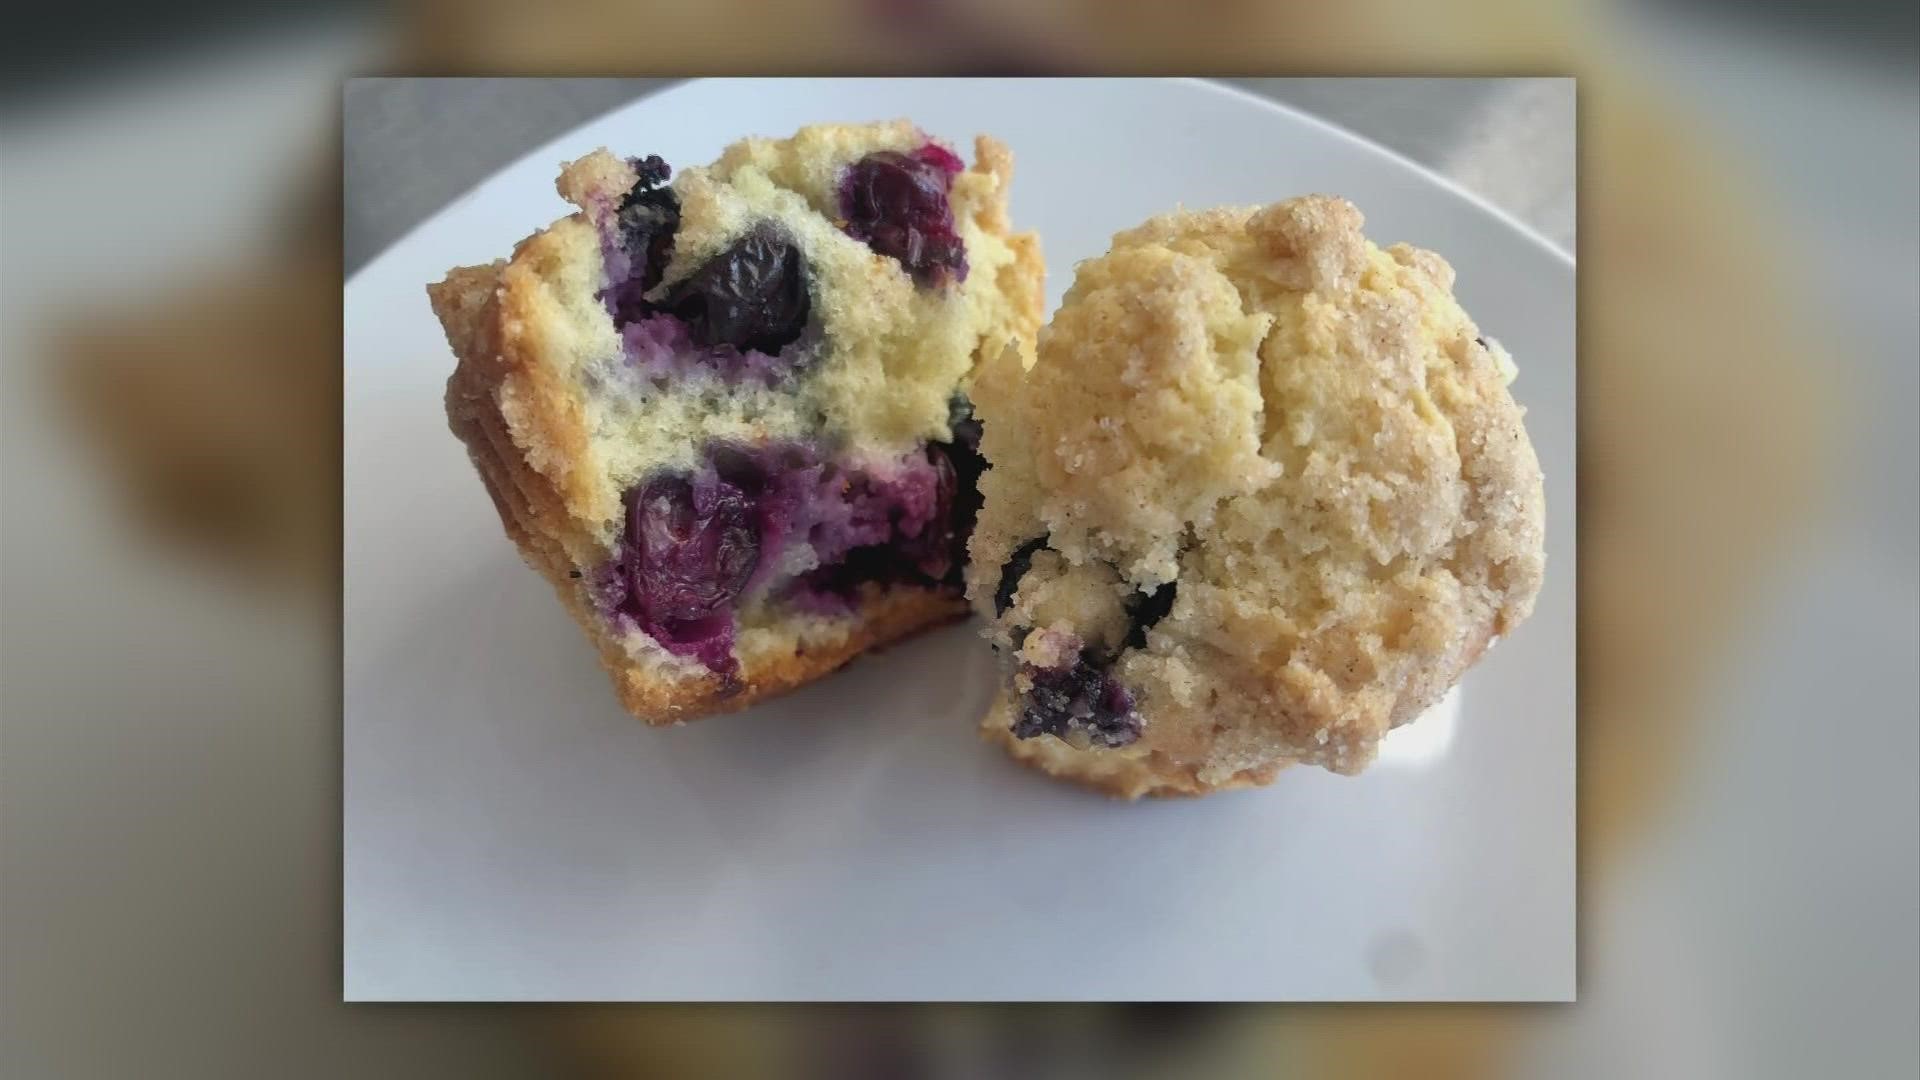 These blueberry muffins are a delicious addition to any breakfast or brunch menu.